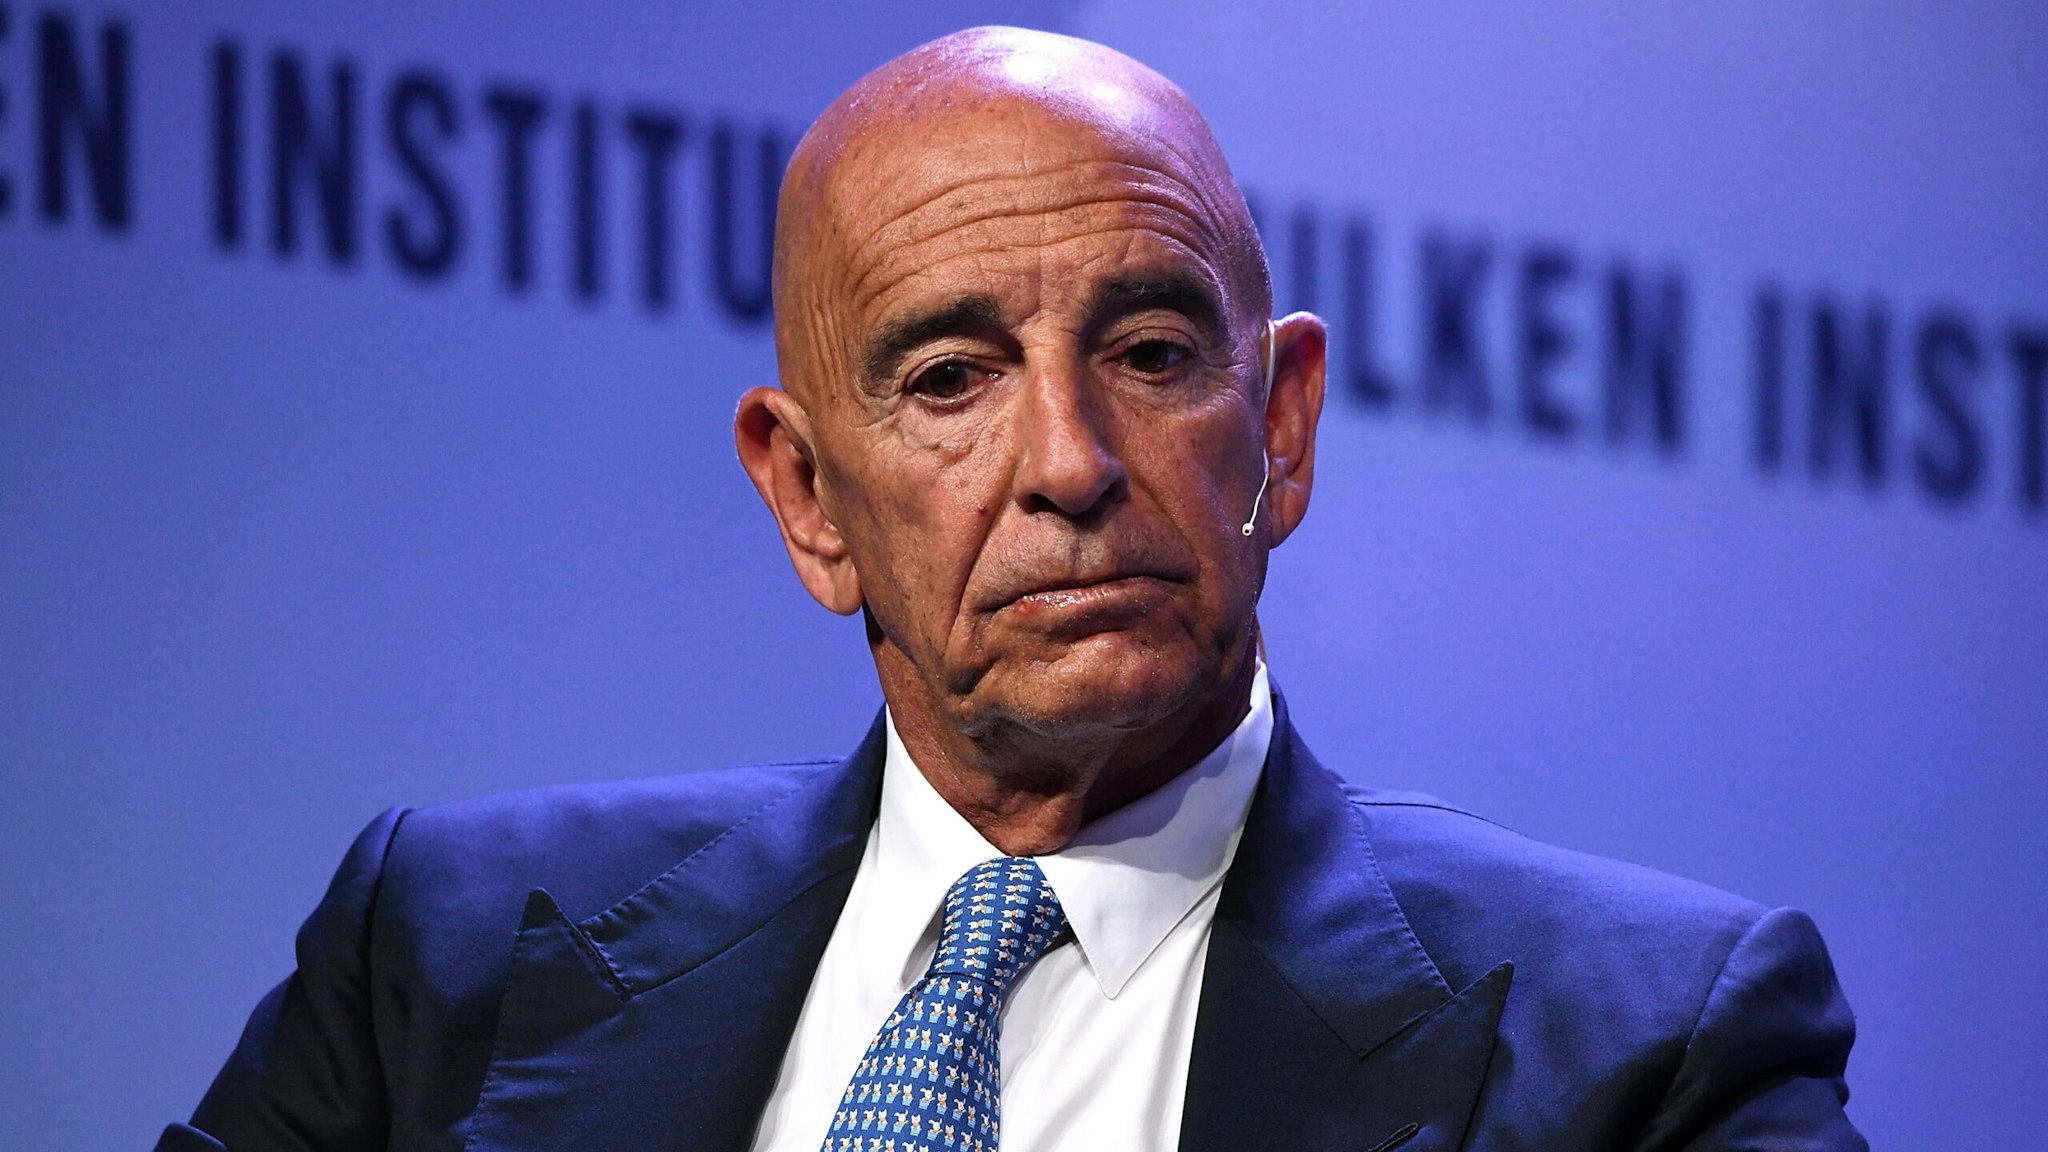 BEVERLY HILLS, CA - APRIL 29: Thomas Barrack, Executive Chairman and CEO, Colony Capital, participates in a panel discussion during the annual Milken Institute Global Conference at The Beverly Hilton Hotel on April 28, 2019 in Beverly Hills, California.